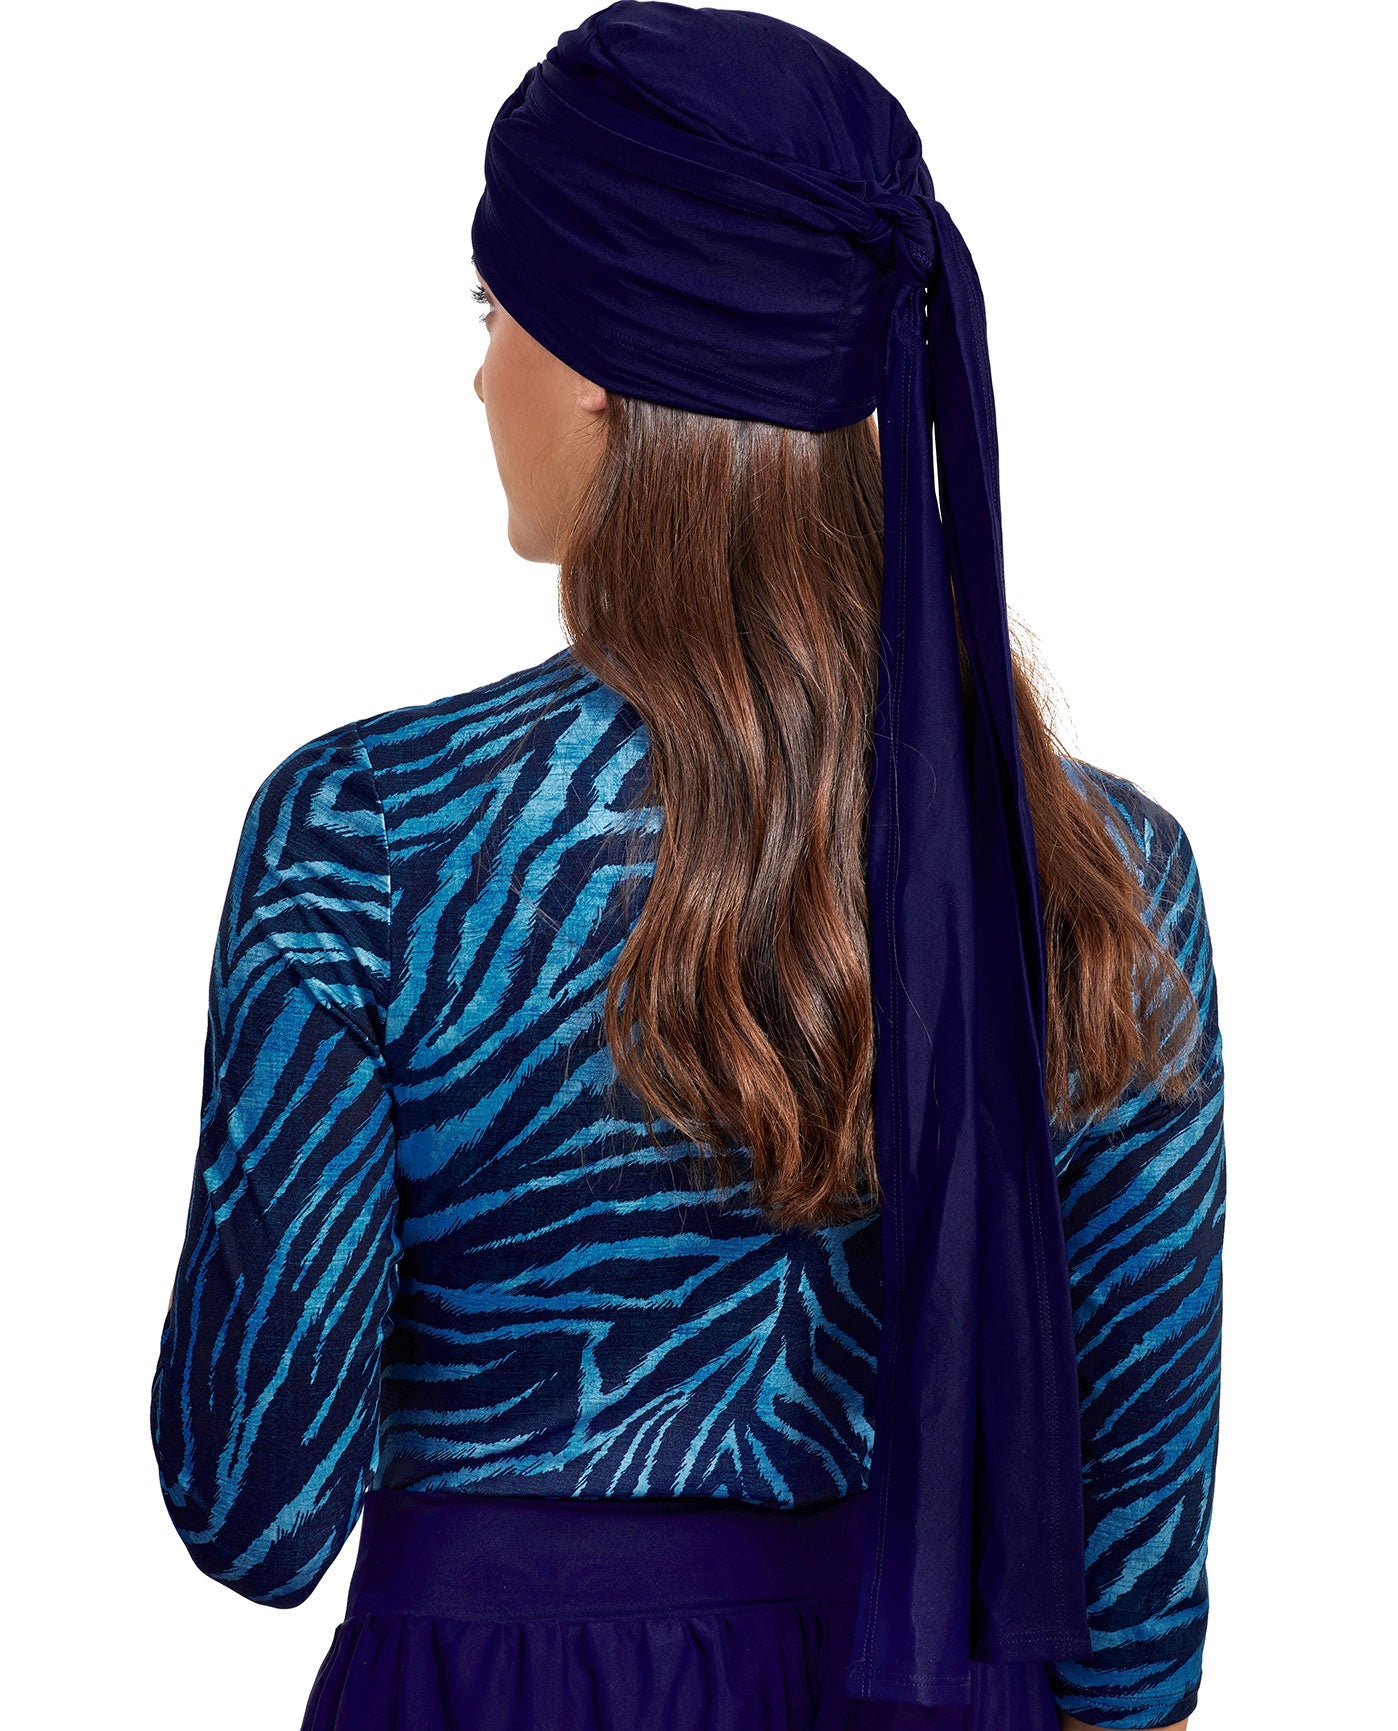 Back View Of Gottex Modest Hair Covering With Tie | GOTTEX MODEST ADMIRAL BLUE